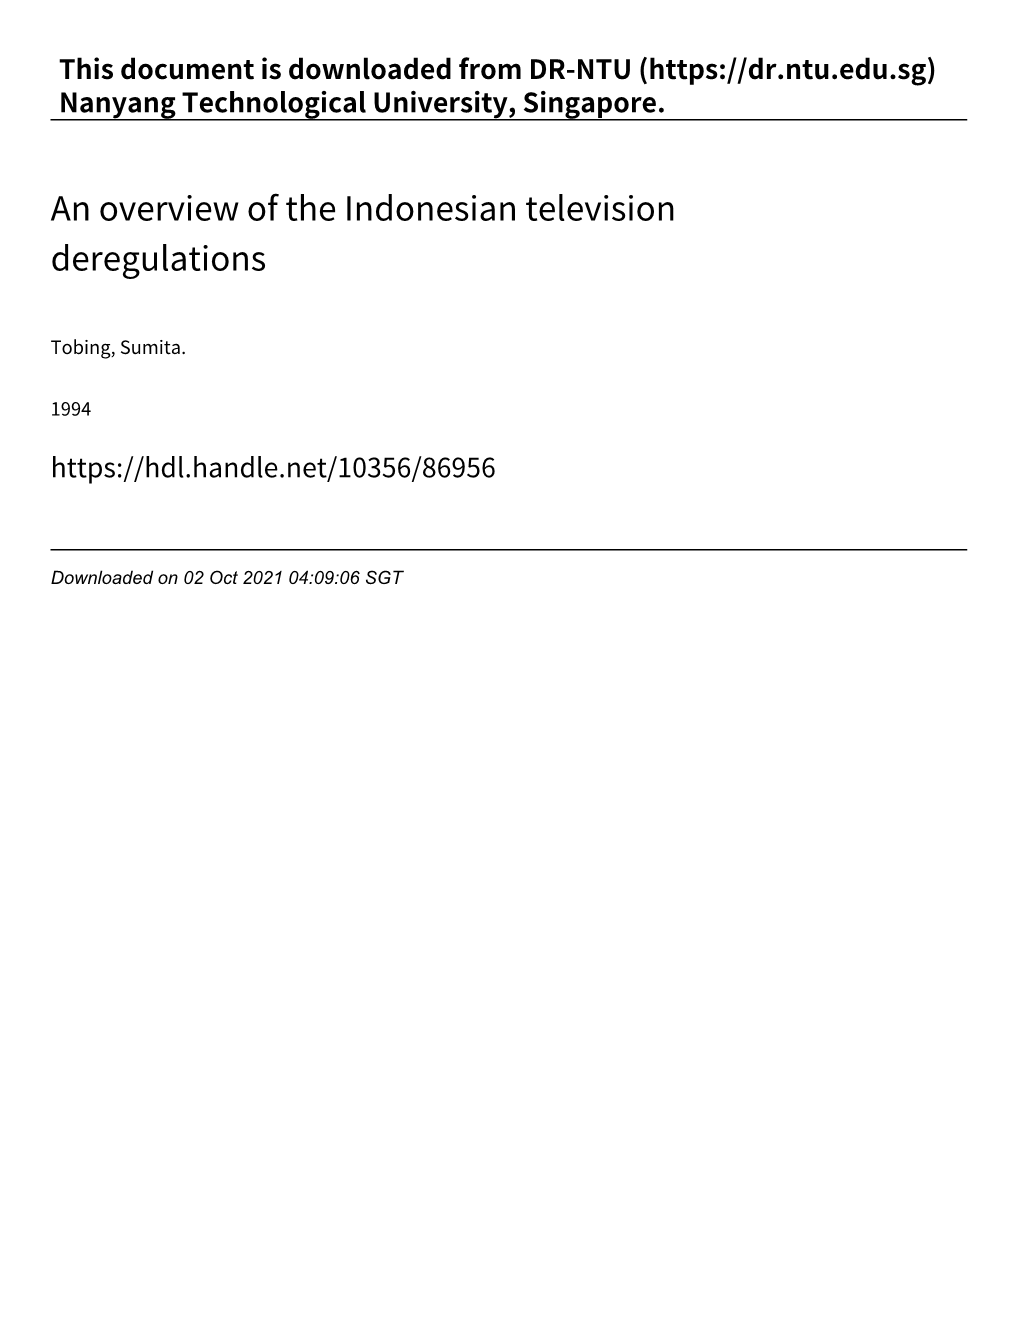 An Overview of the Indonesian Television Deregulations